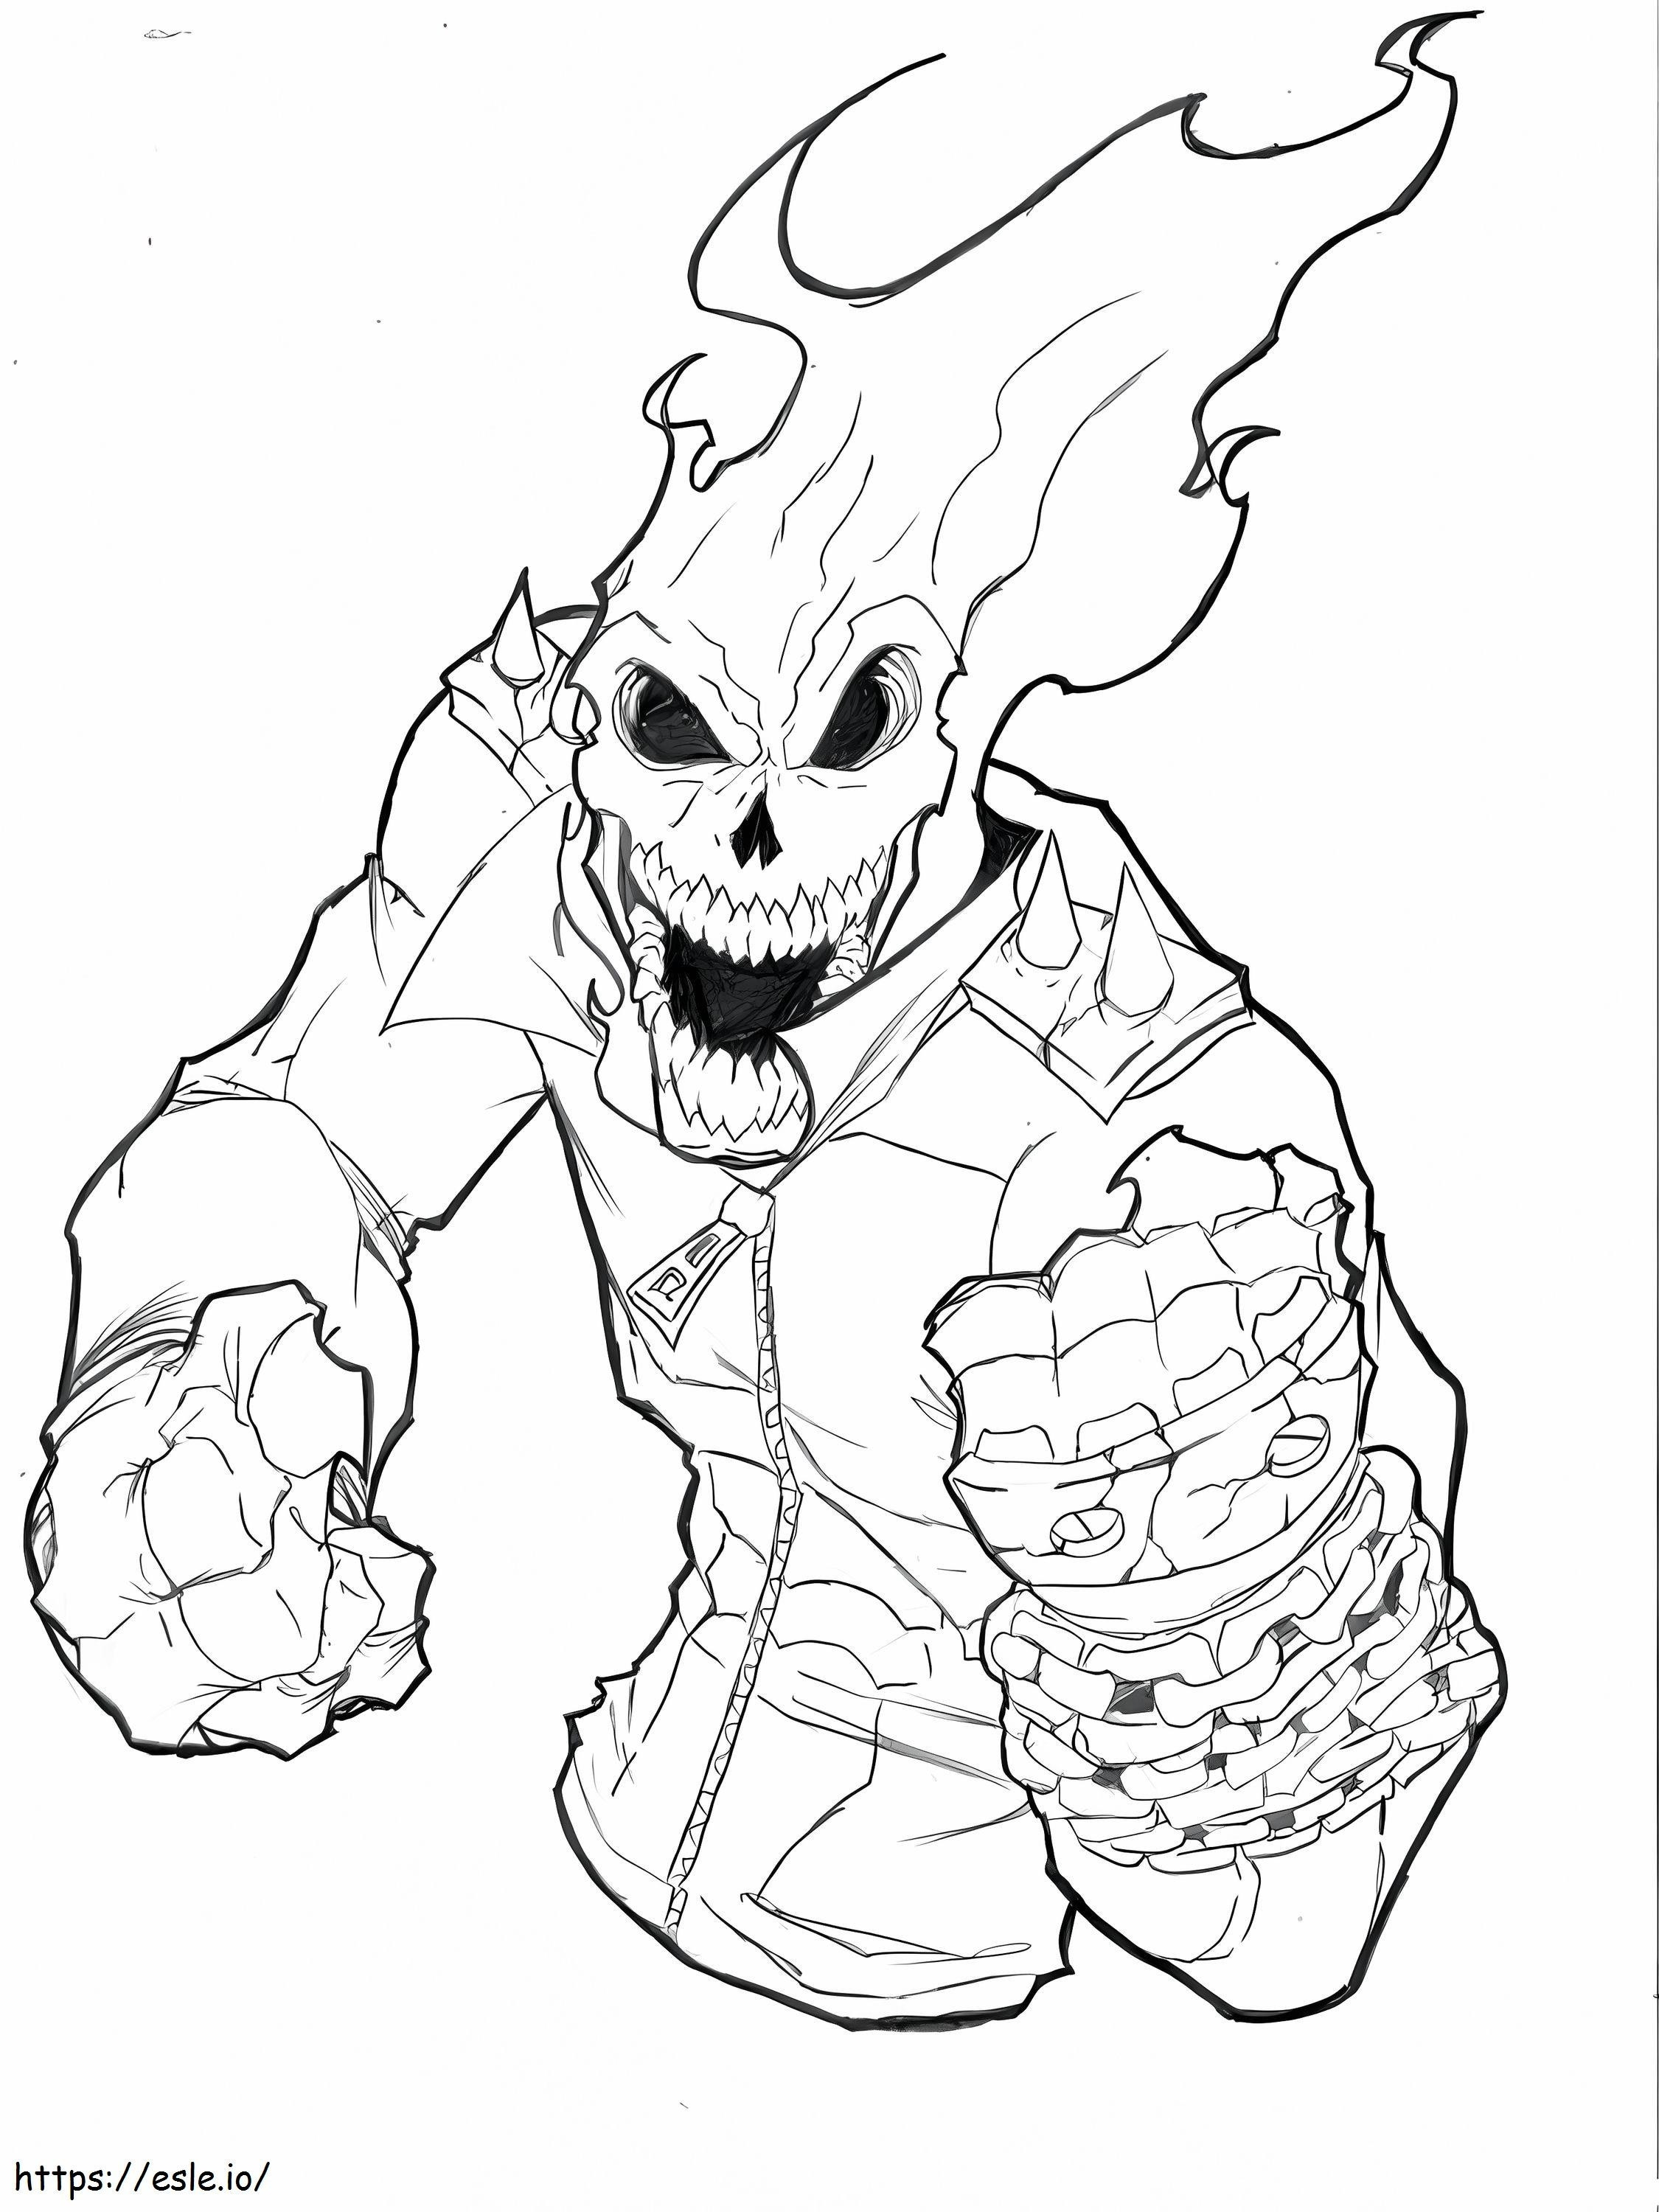 Scary Ghost Rider Face coloring page